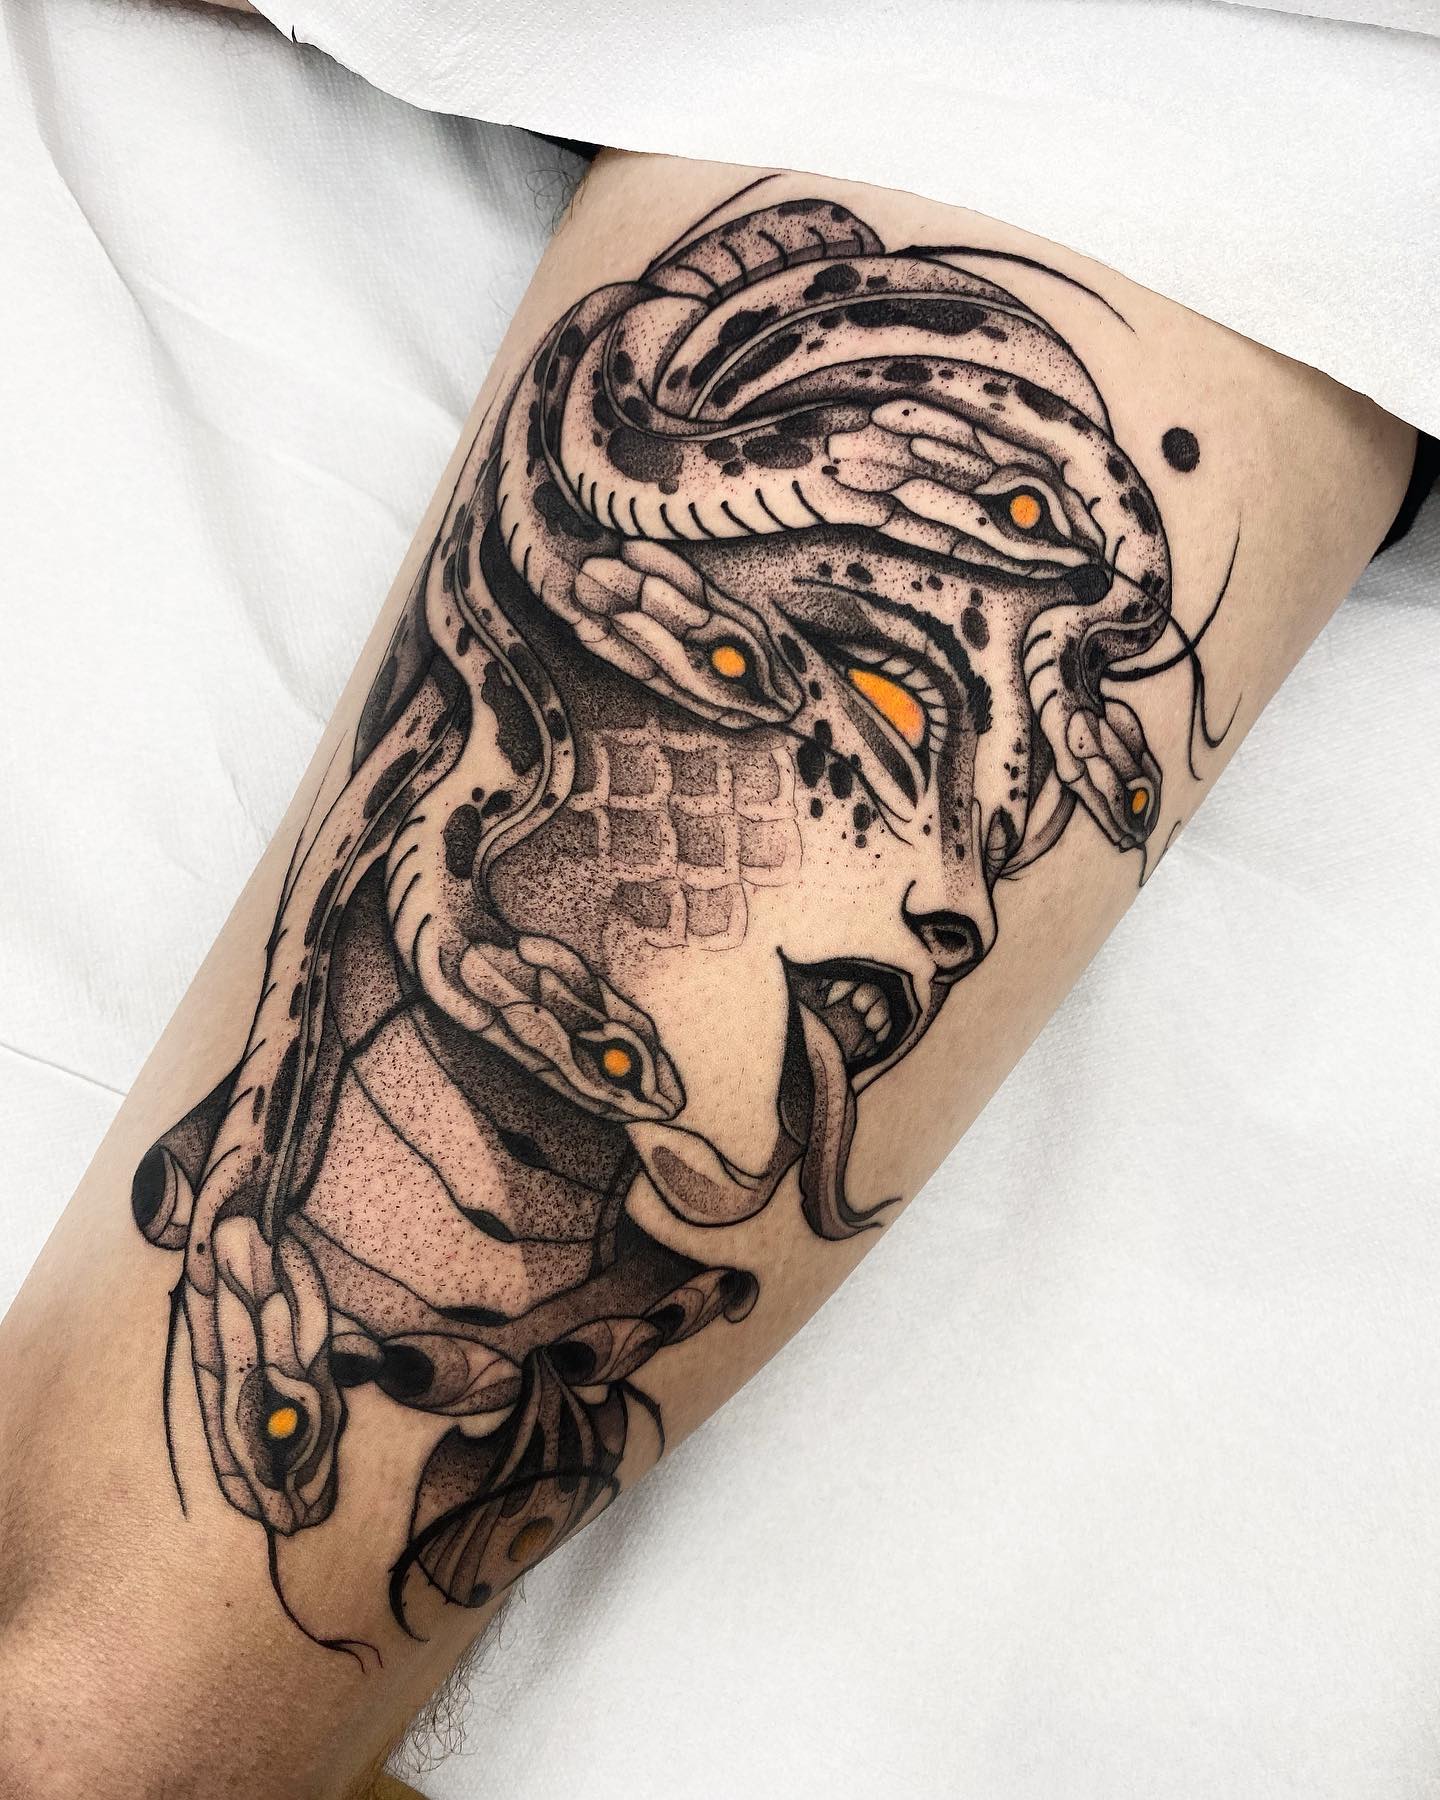 If you want to get a Medusa tattoo that shows her something evil and scary, then this tattoo is definitely for you. In this blackwork tattoo, Medusa's and the snakes' eyes are yellow, which shows a contrast with black. Go and get this tattoo as soon as possible.